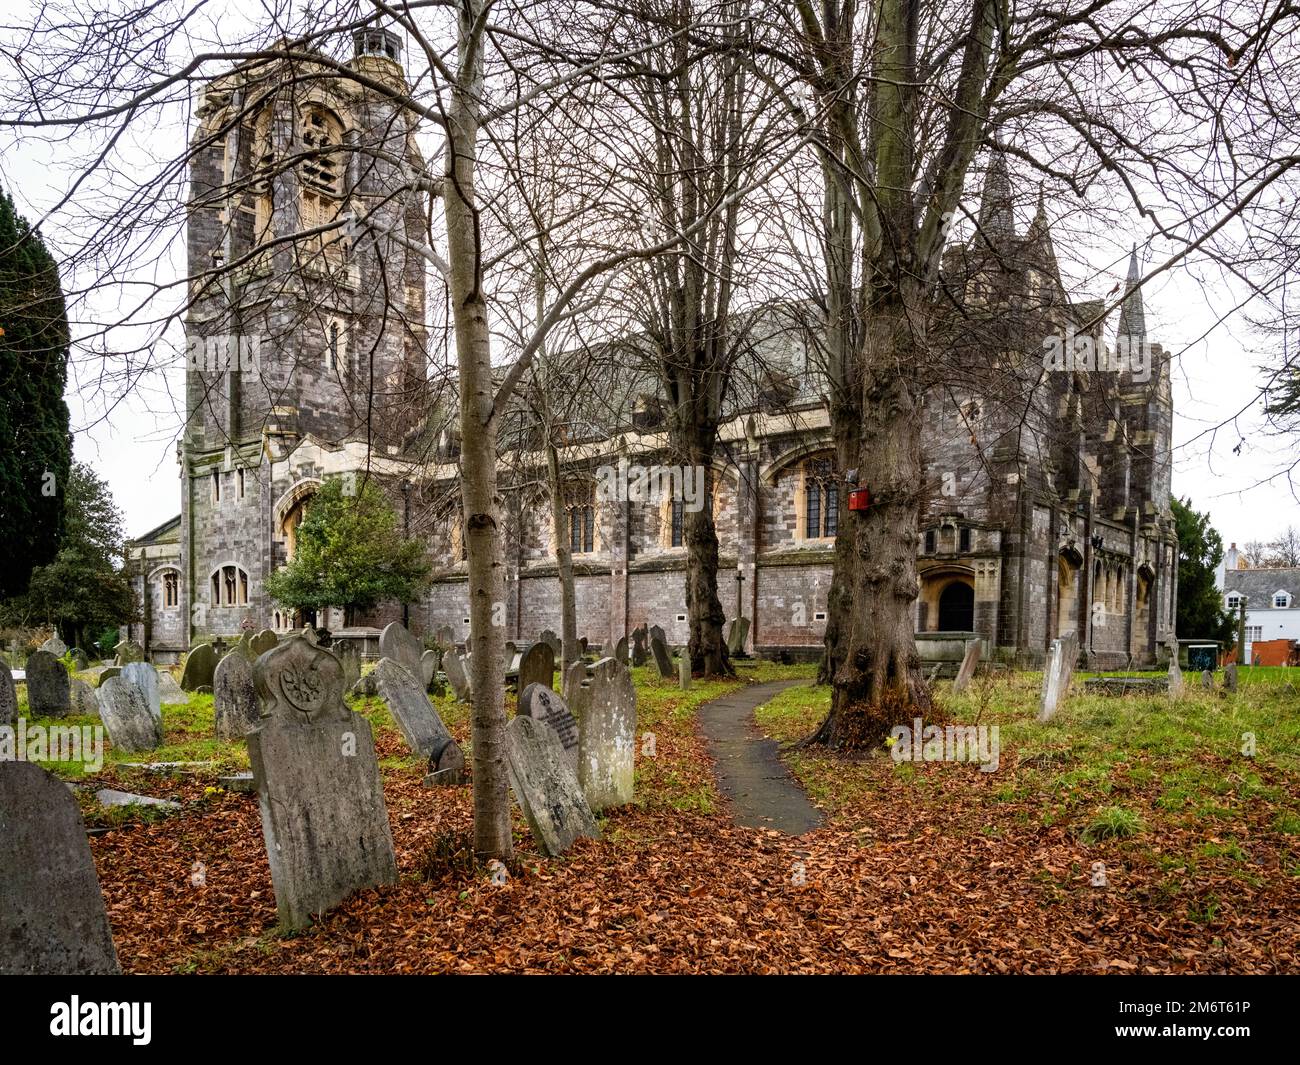 Saint David's Church (1900), Exeter, is a Grade I listed building, described by John Betjeman as the finest example of Victorian church architecture. Stock Photo